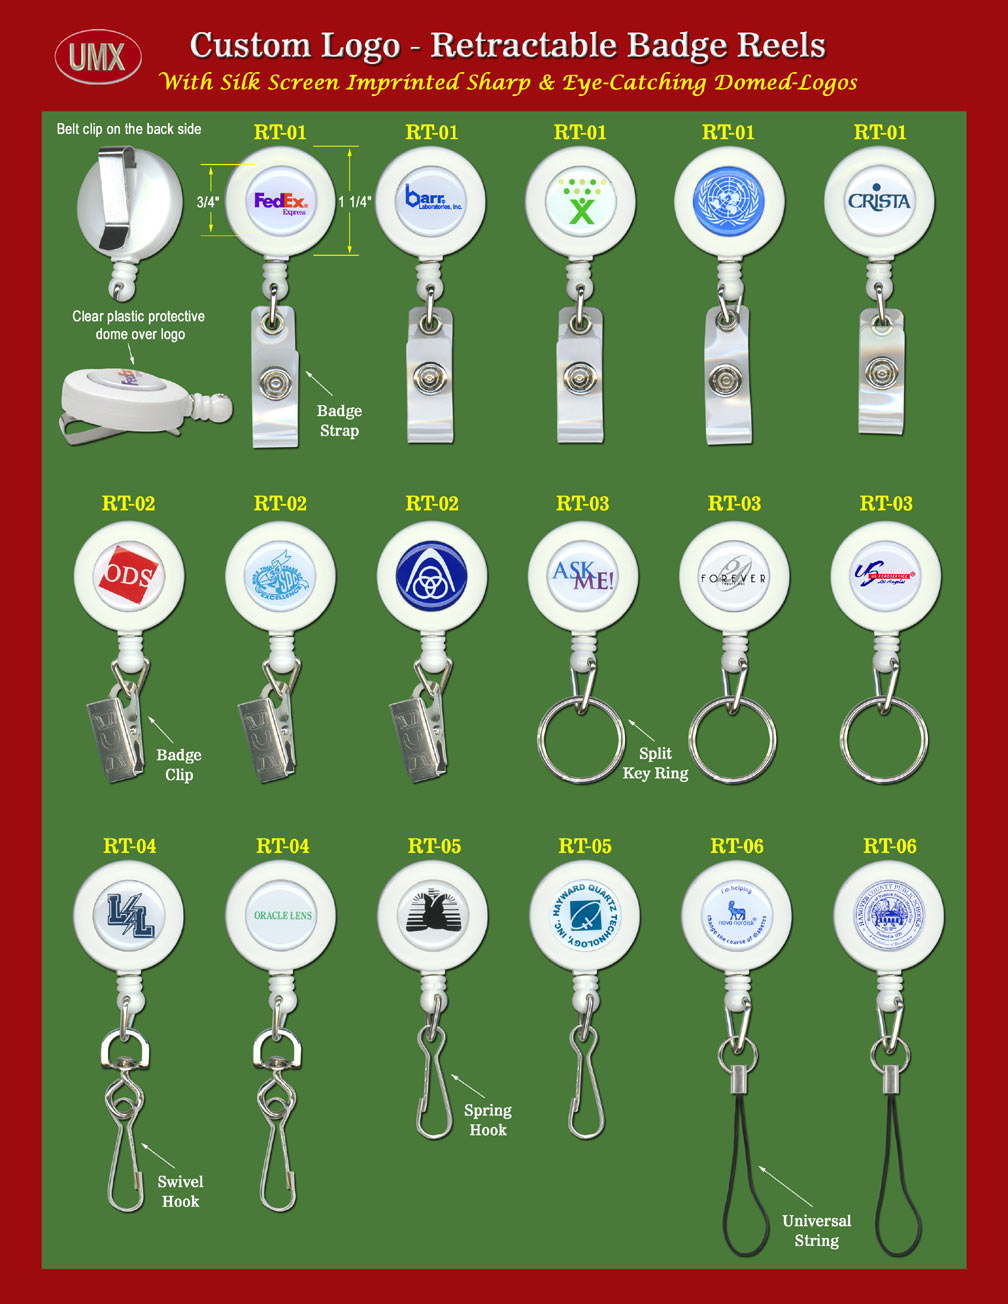 Custom Made Retractable Badges For A Variety of Custom Functions.